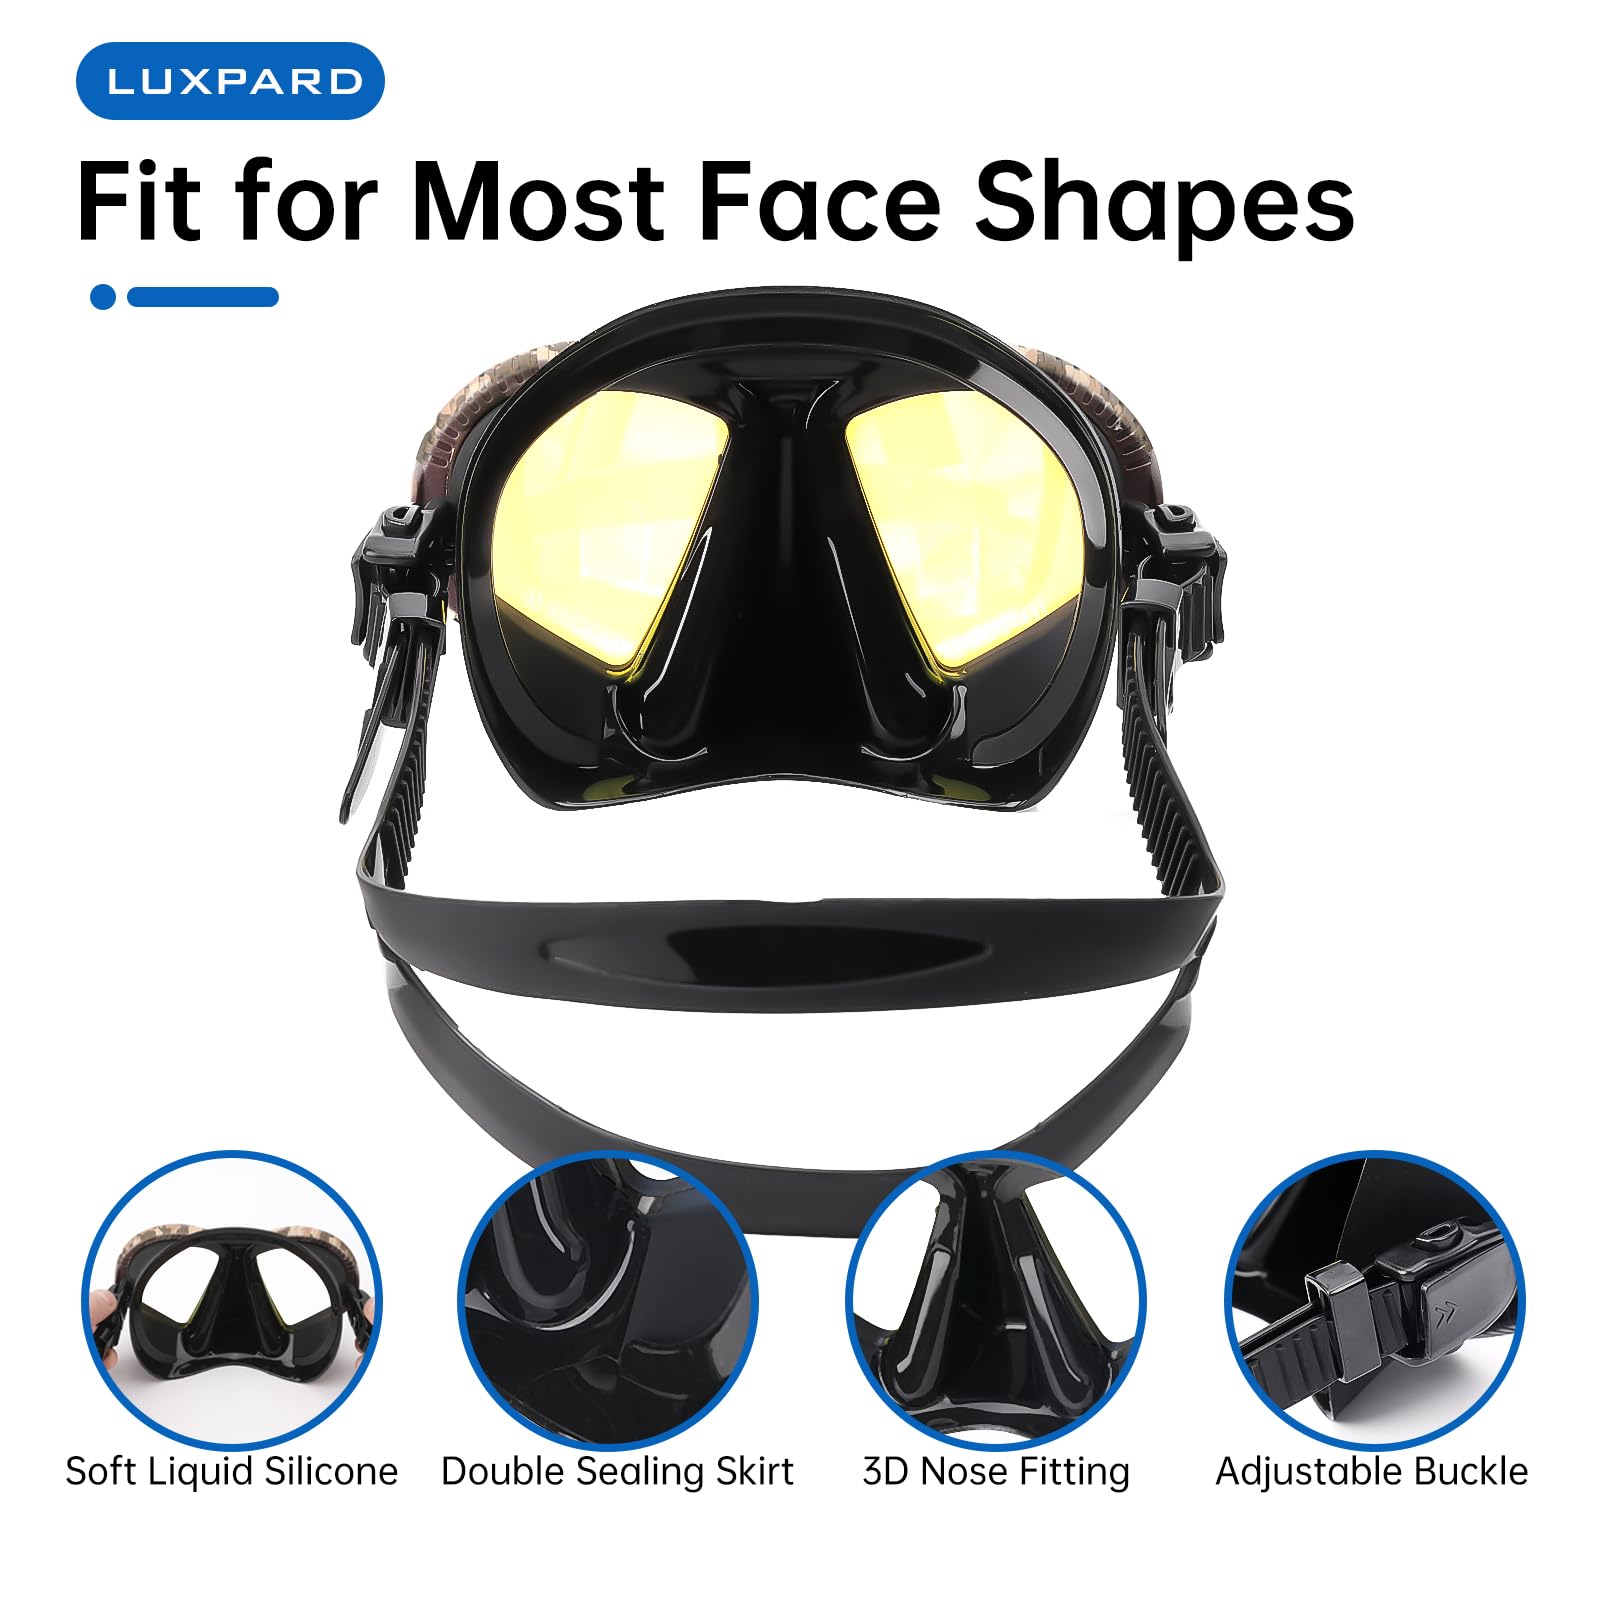 LUXPARD Diving Mask, Scuba Mask for Scuba Diving, Snorkeling, Free Diving, and Skin Diving. Anti-Fog Anti-Leak Low Volume Dive Mask with UV Coated Lenses, Scuba Gear for Adults